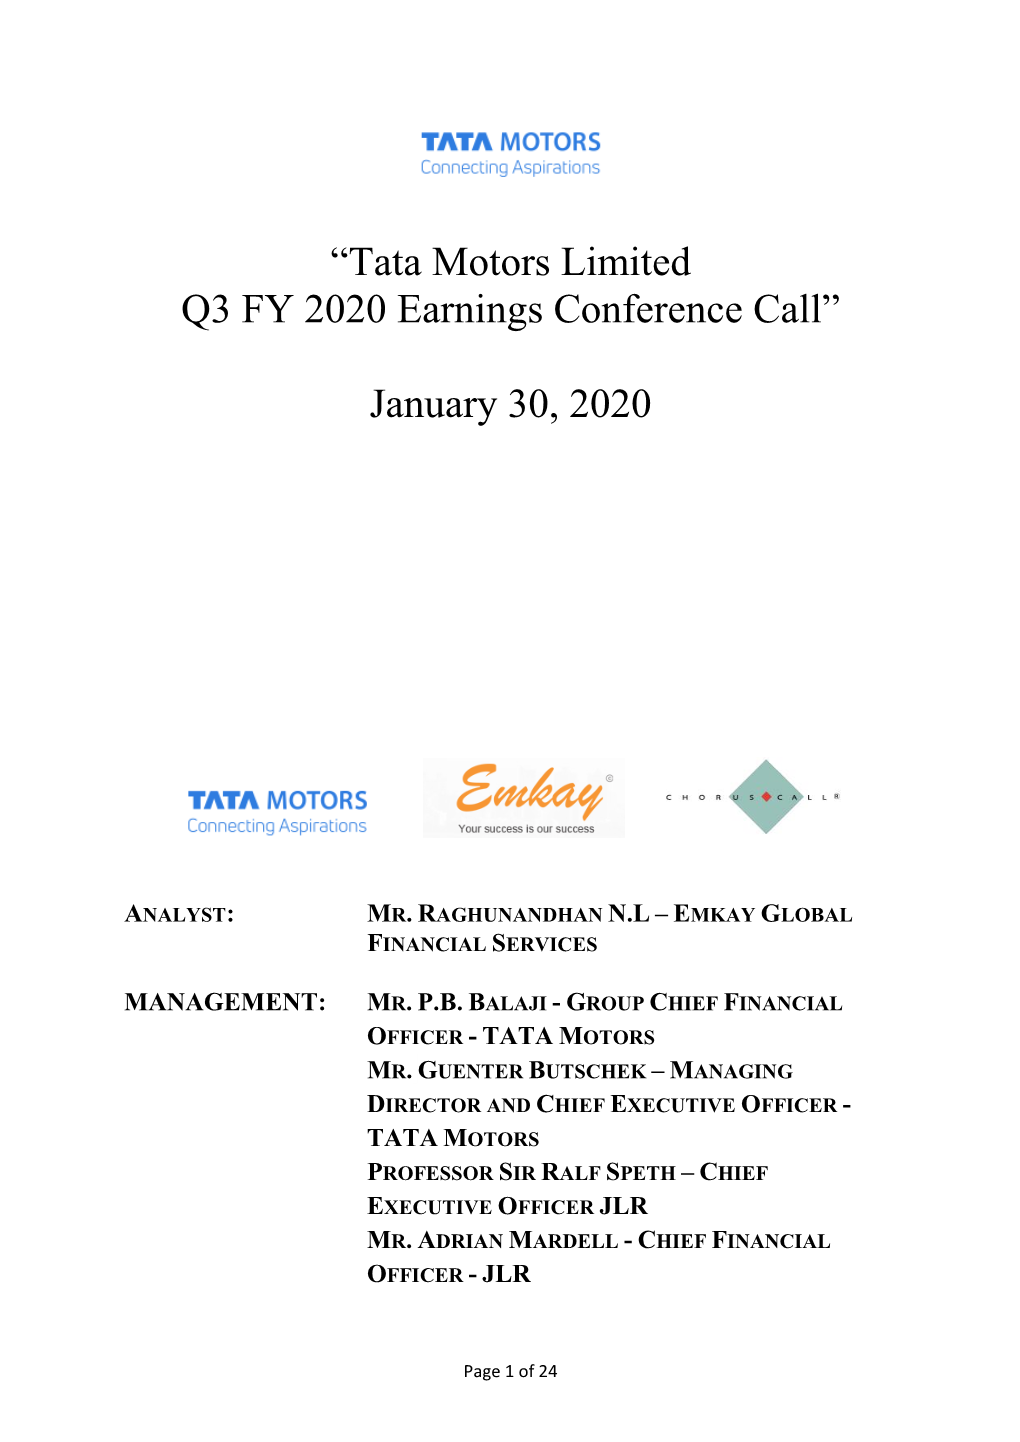 “Tata Motors Limited Q3 FY 2020 Earnings Conference Call” January